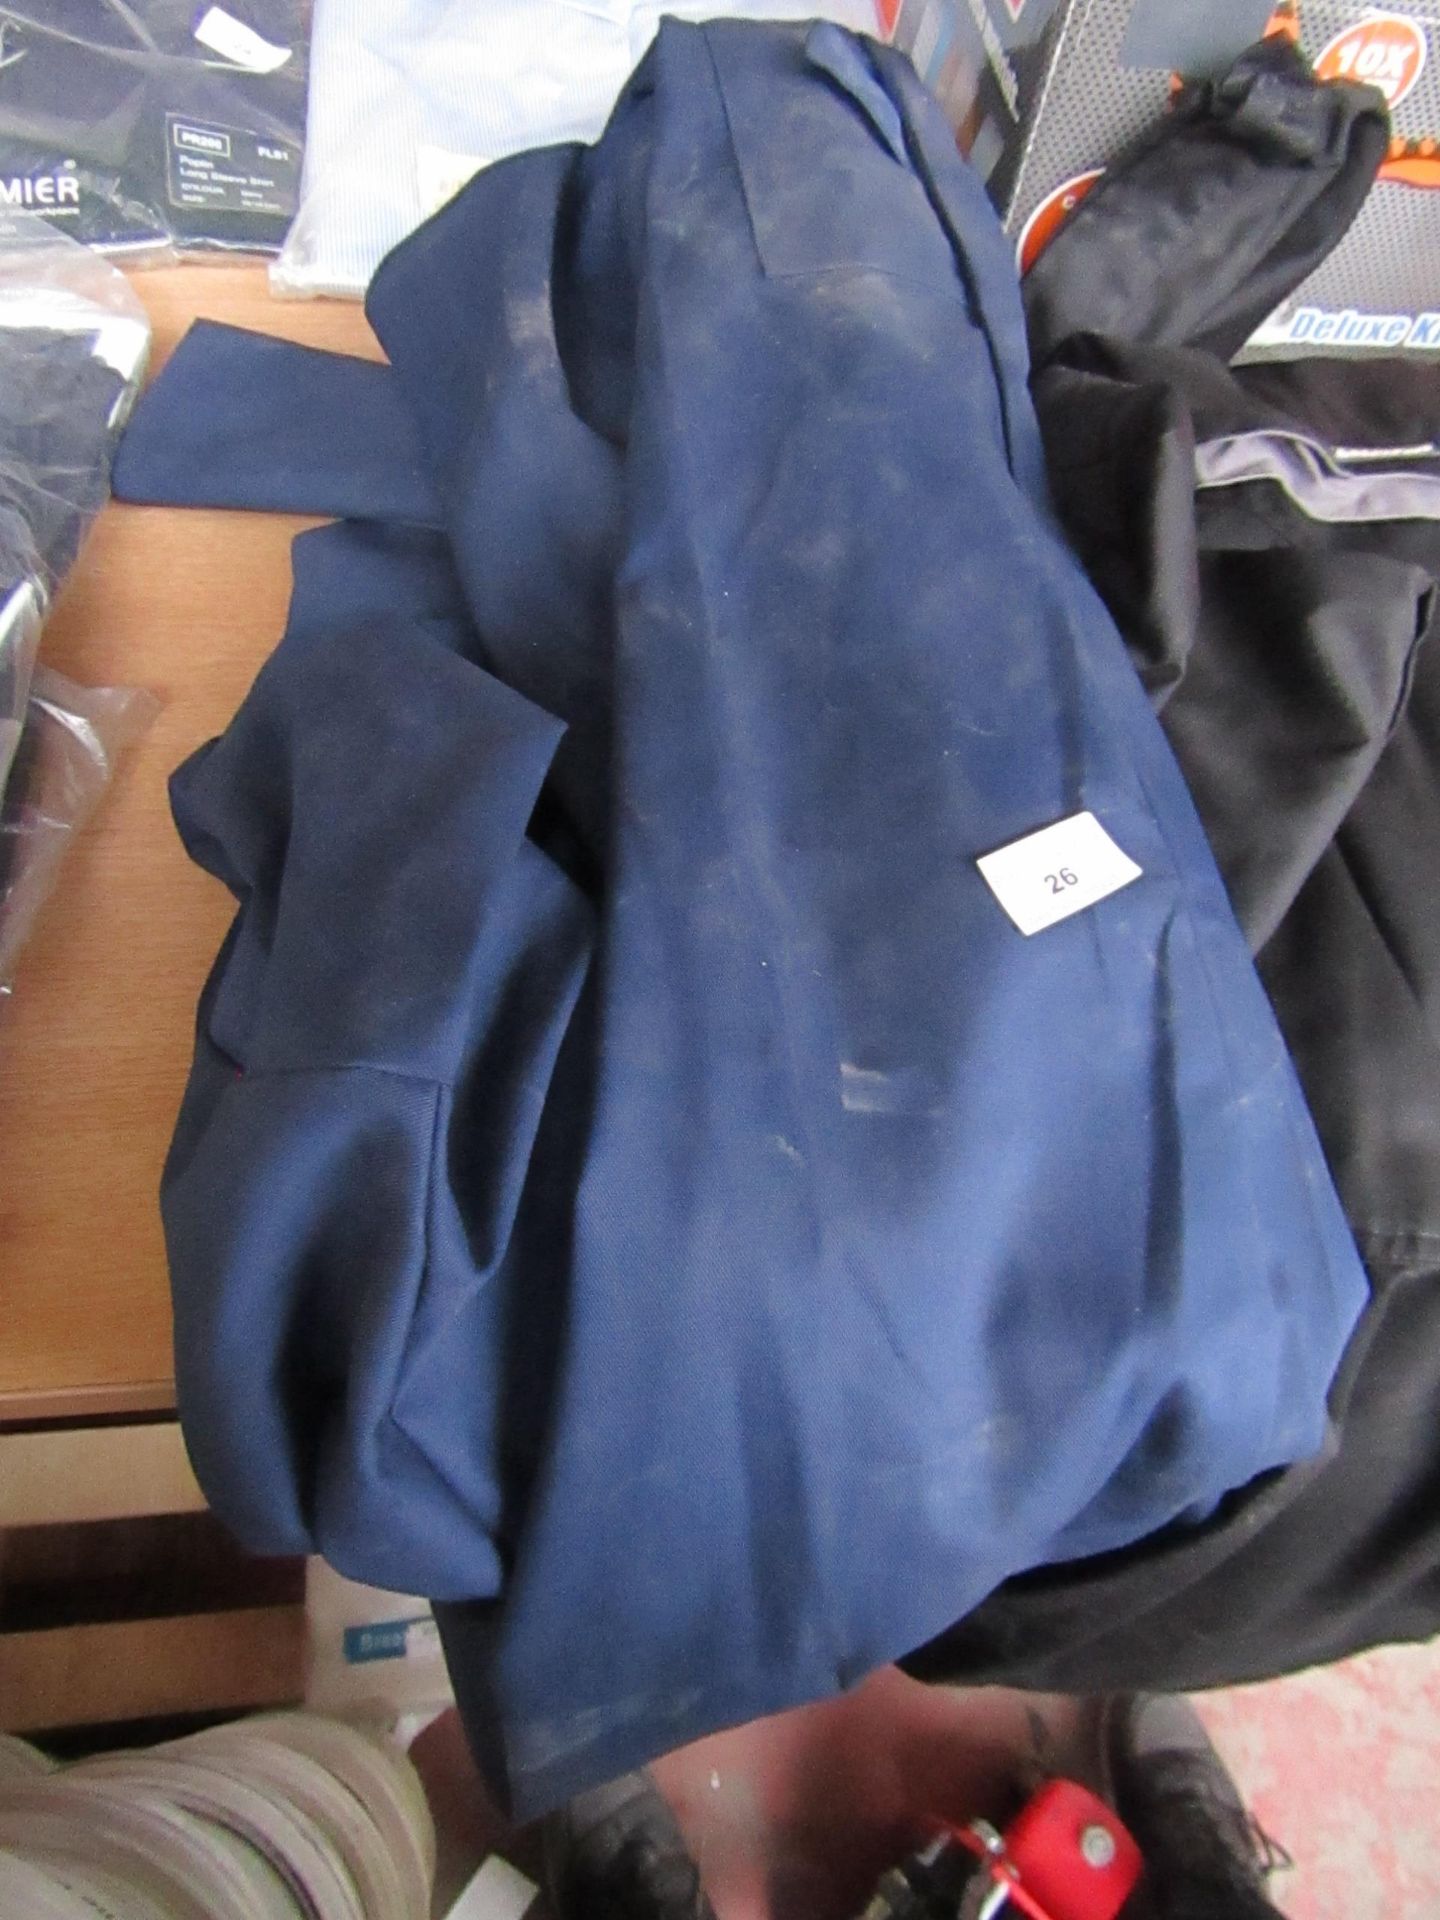 Hercules - Navy Boilersuit - Size 46 - Unpackaged, May Need A Clean.